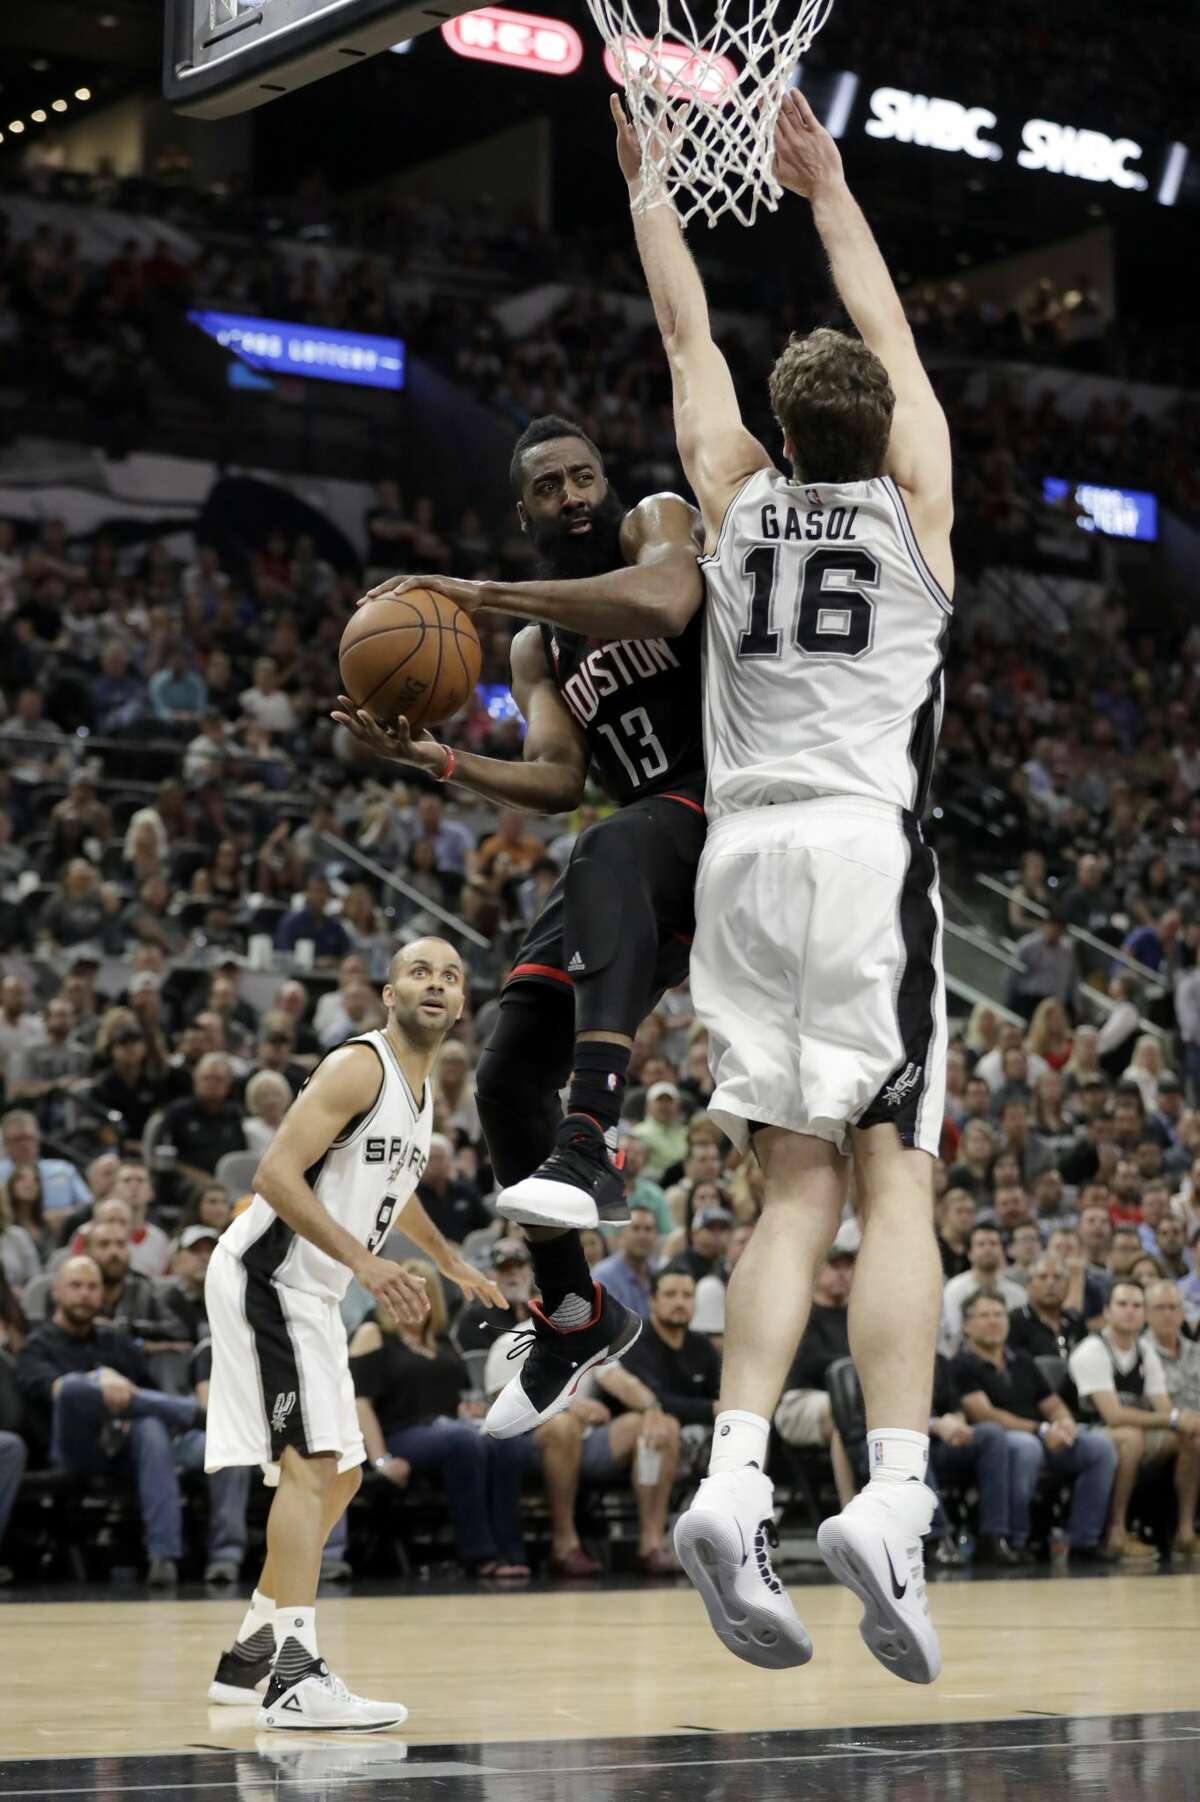 Houston Rockets guard James Harden is forced to pass the ball as San Antonio Spurs' Tony Parker, left, of France and Pau Gasol, (16), of Spain defend during the first half of Game 2 in a second-round NBA basketball playoff series, Wednesday, May 3, 2017, in San Antonio. (AP Photo/Eric Gay)